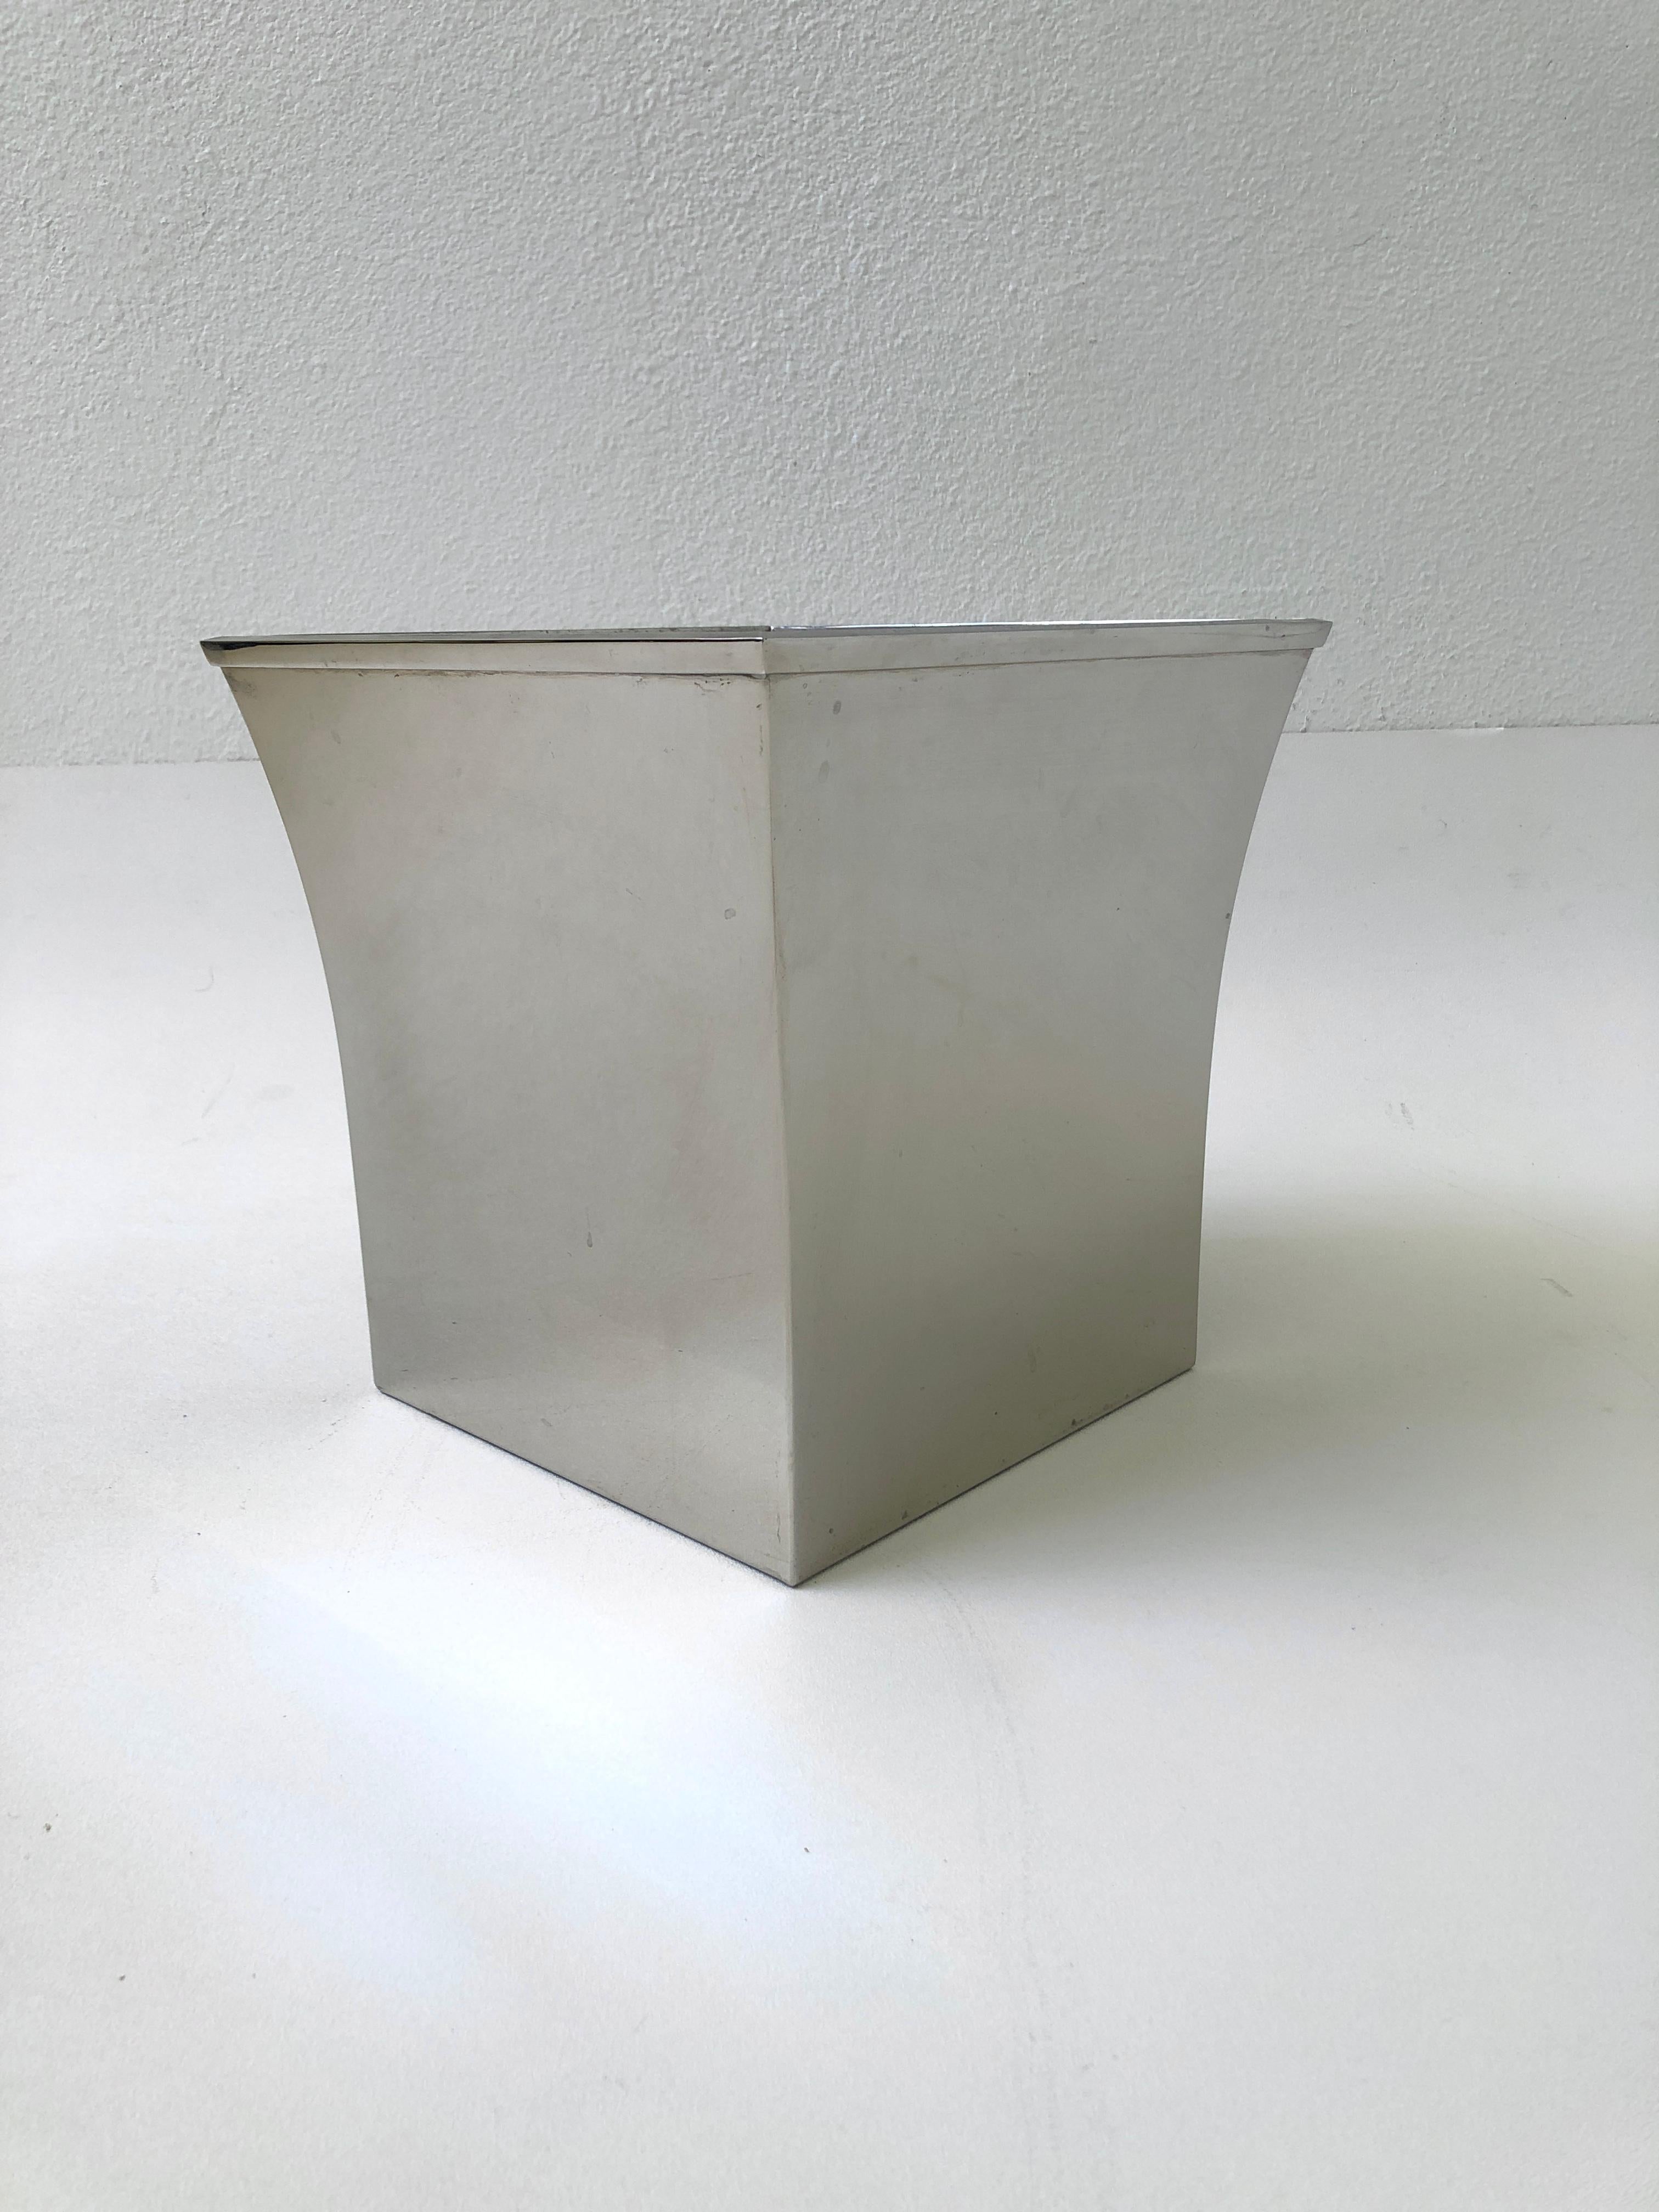 A glamorous 1980’s solid polish stainless steel wastebasket by Karl Springer.
Out of a Steve Chase designed estate. We also have one available in polish brass. 
Newly professionally polished.
Measurements: 11.25” high, 11” wide, 11” deep.